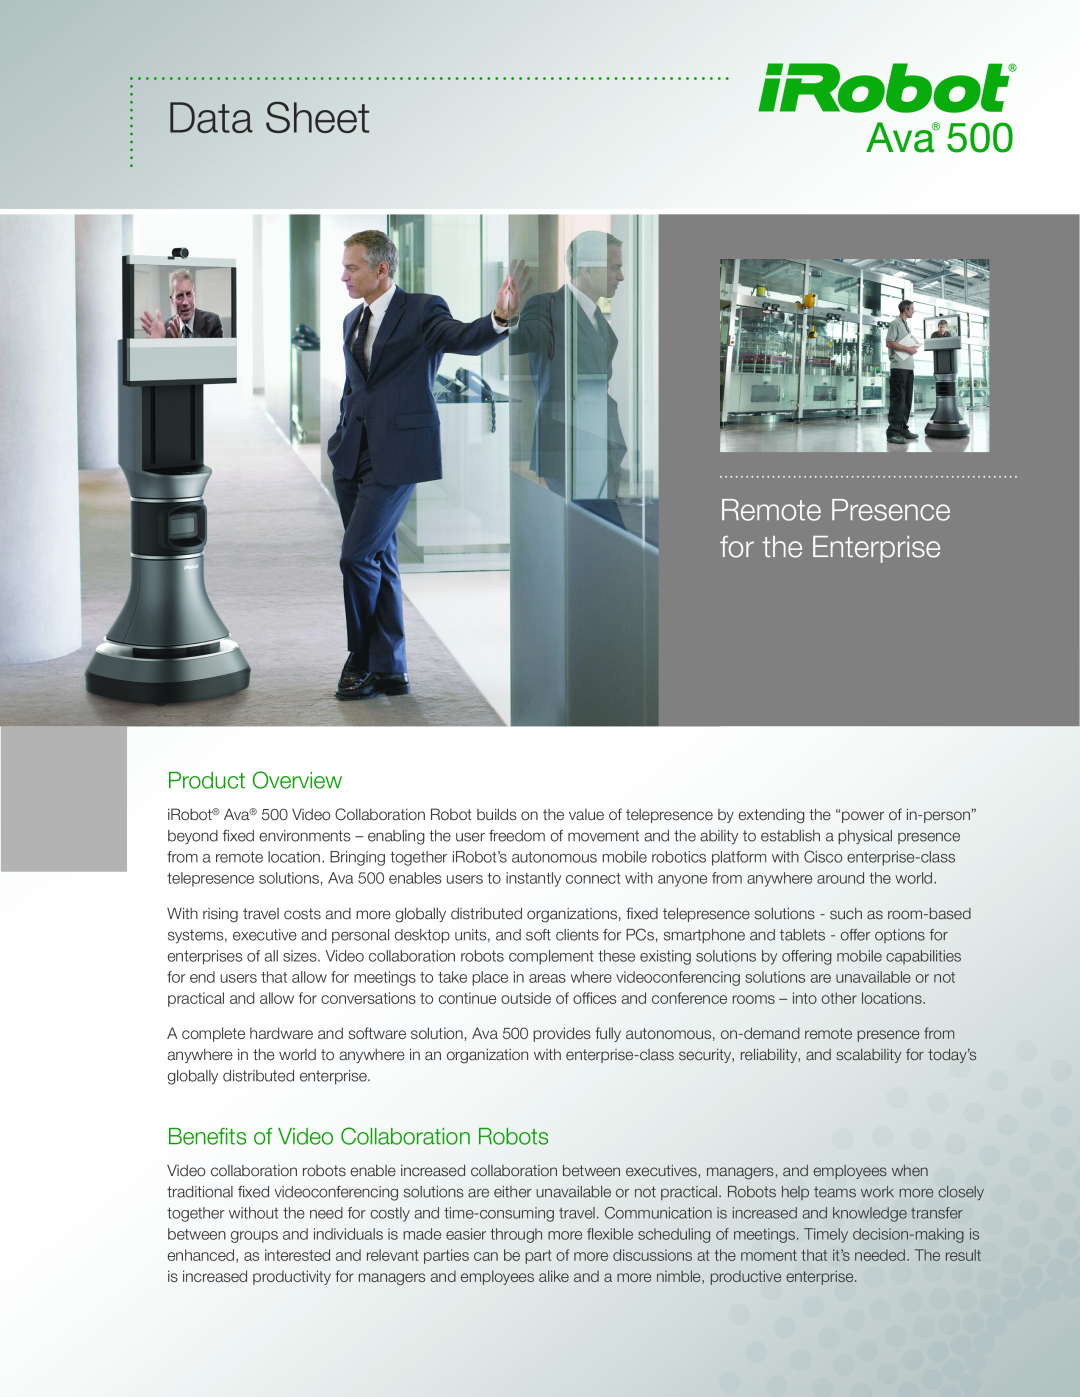 iRobot 500 manual Product Overview, Benefits of Video Collaboration Robots, Data Sheet, Remote Presence for the Enterprise 